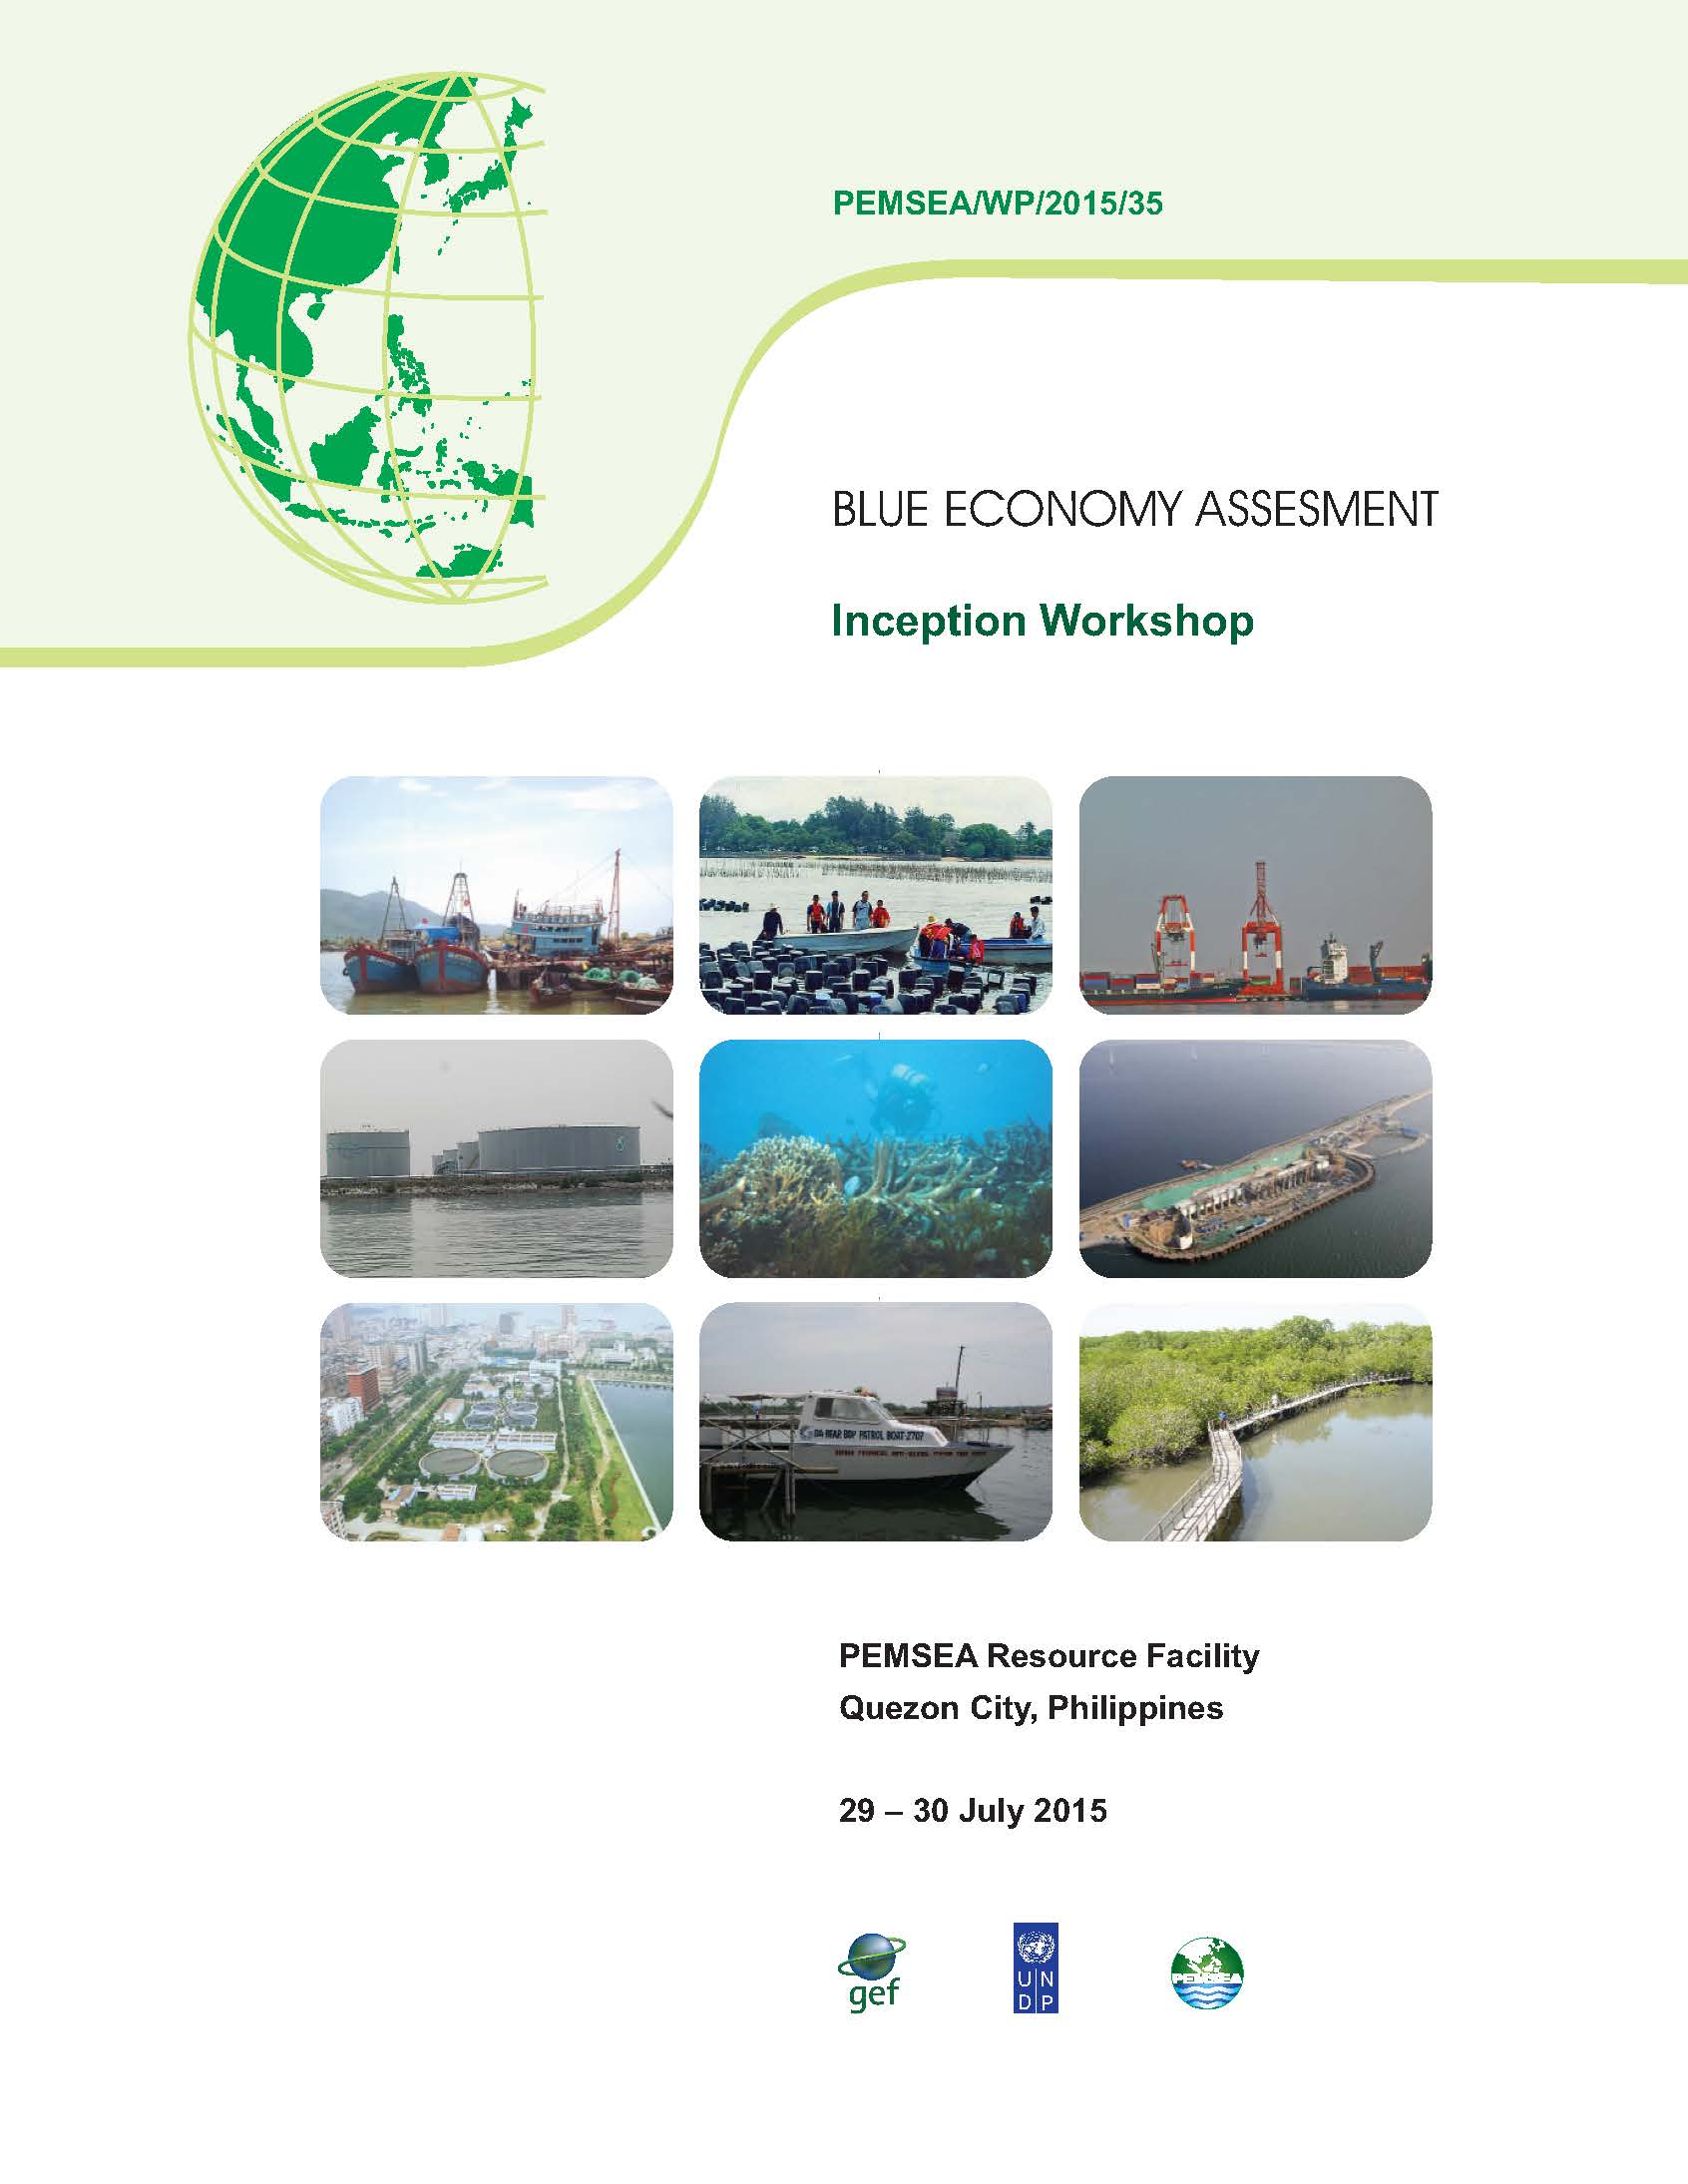 Proceedings of the Blue Economy Assessment Inception Workshop